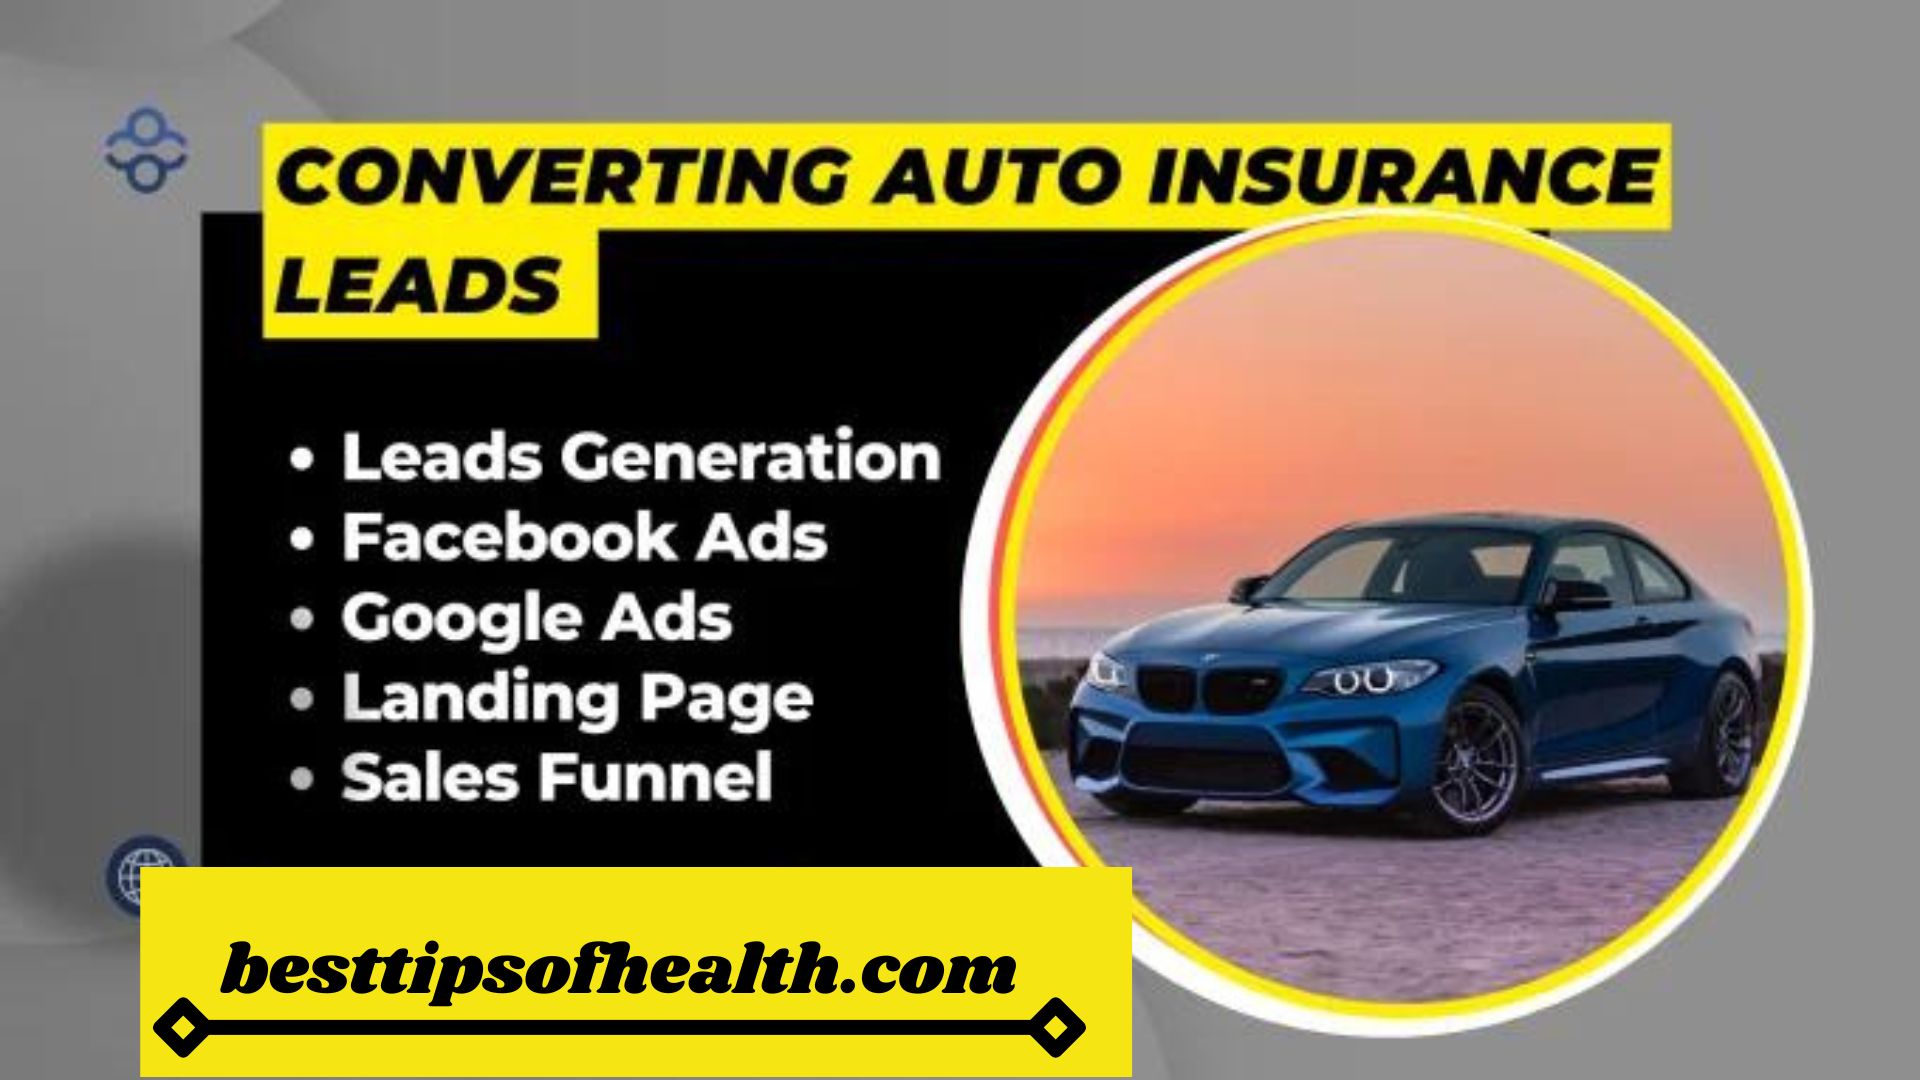 Get the Best Auto Insurance Deals in 2023